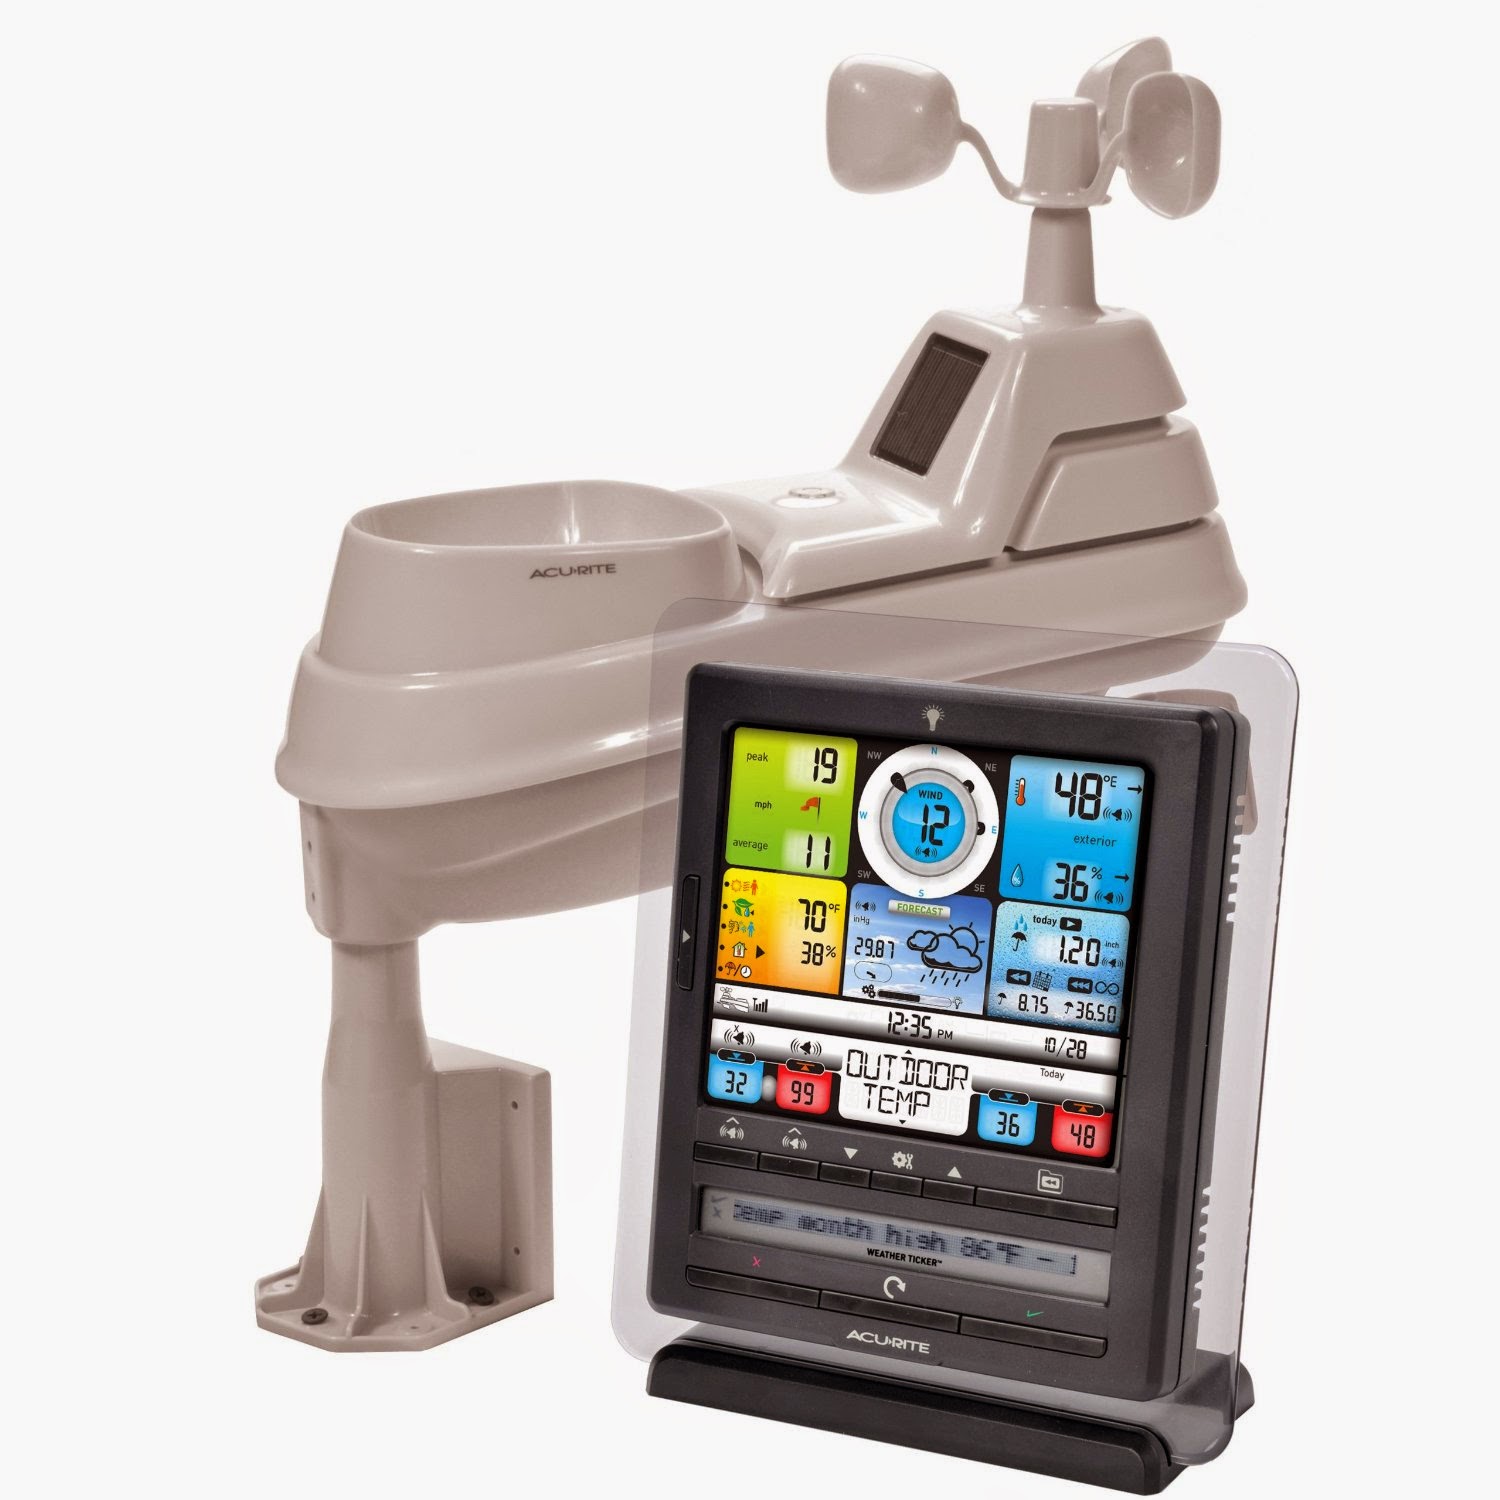 AcuRite 01036 8-Inch Pro Color Digital Weather Station